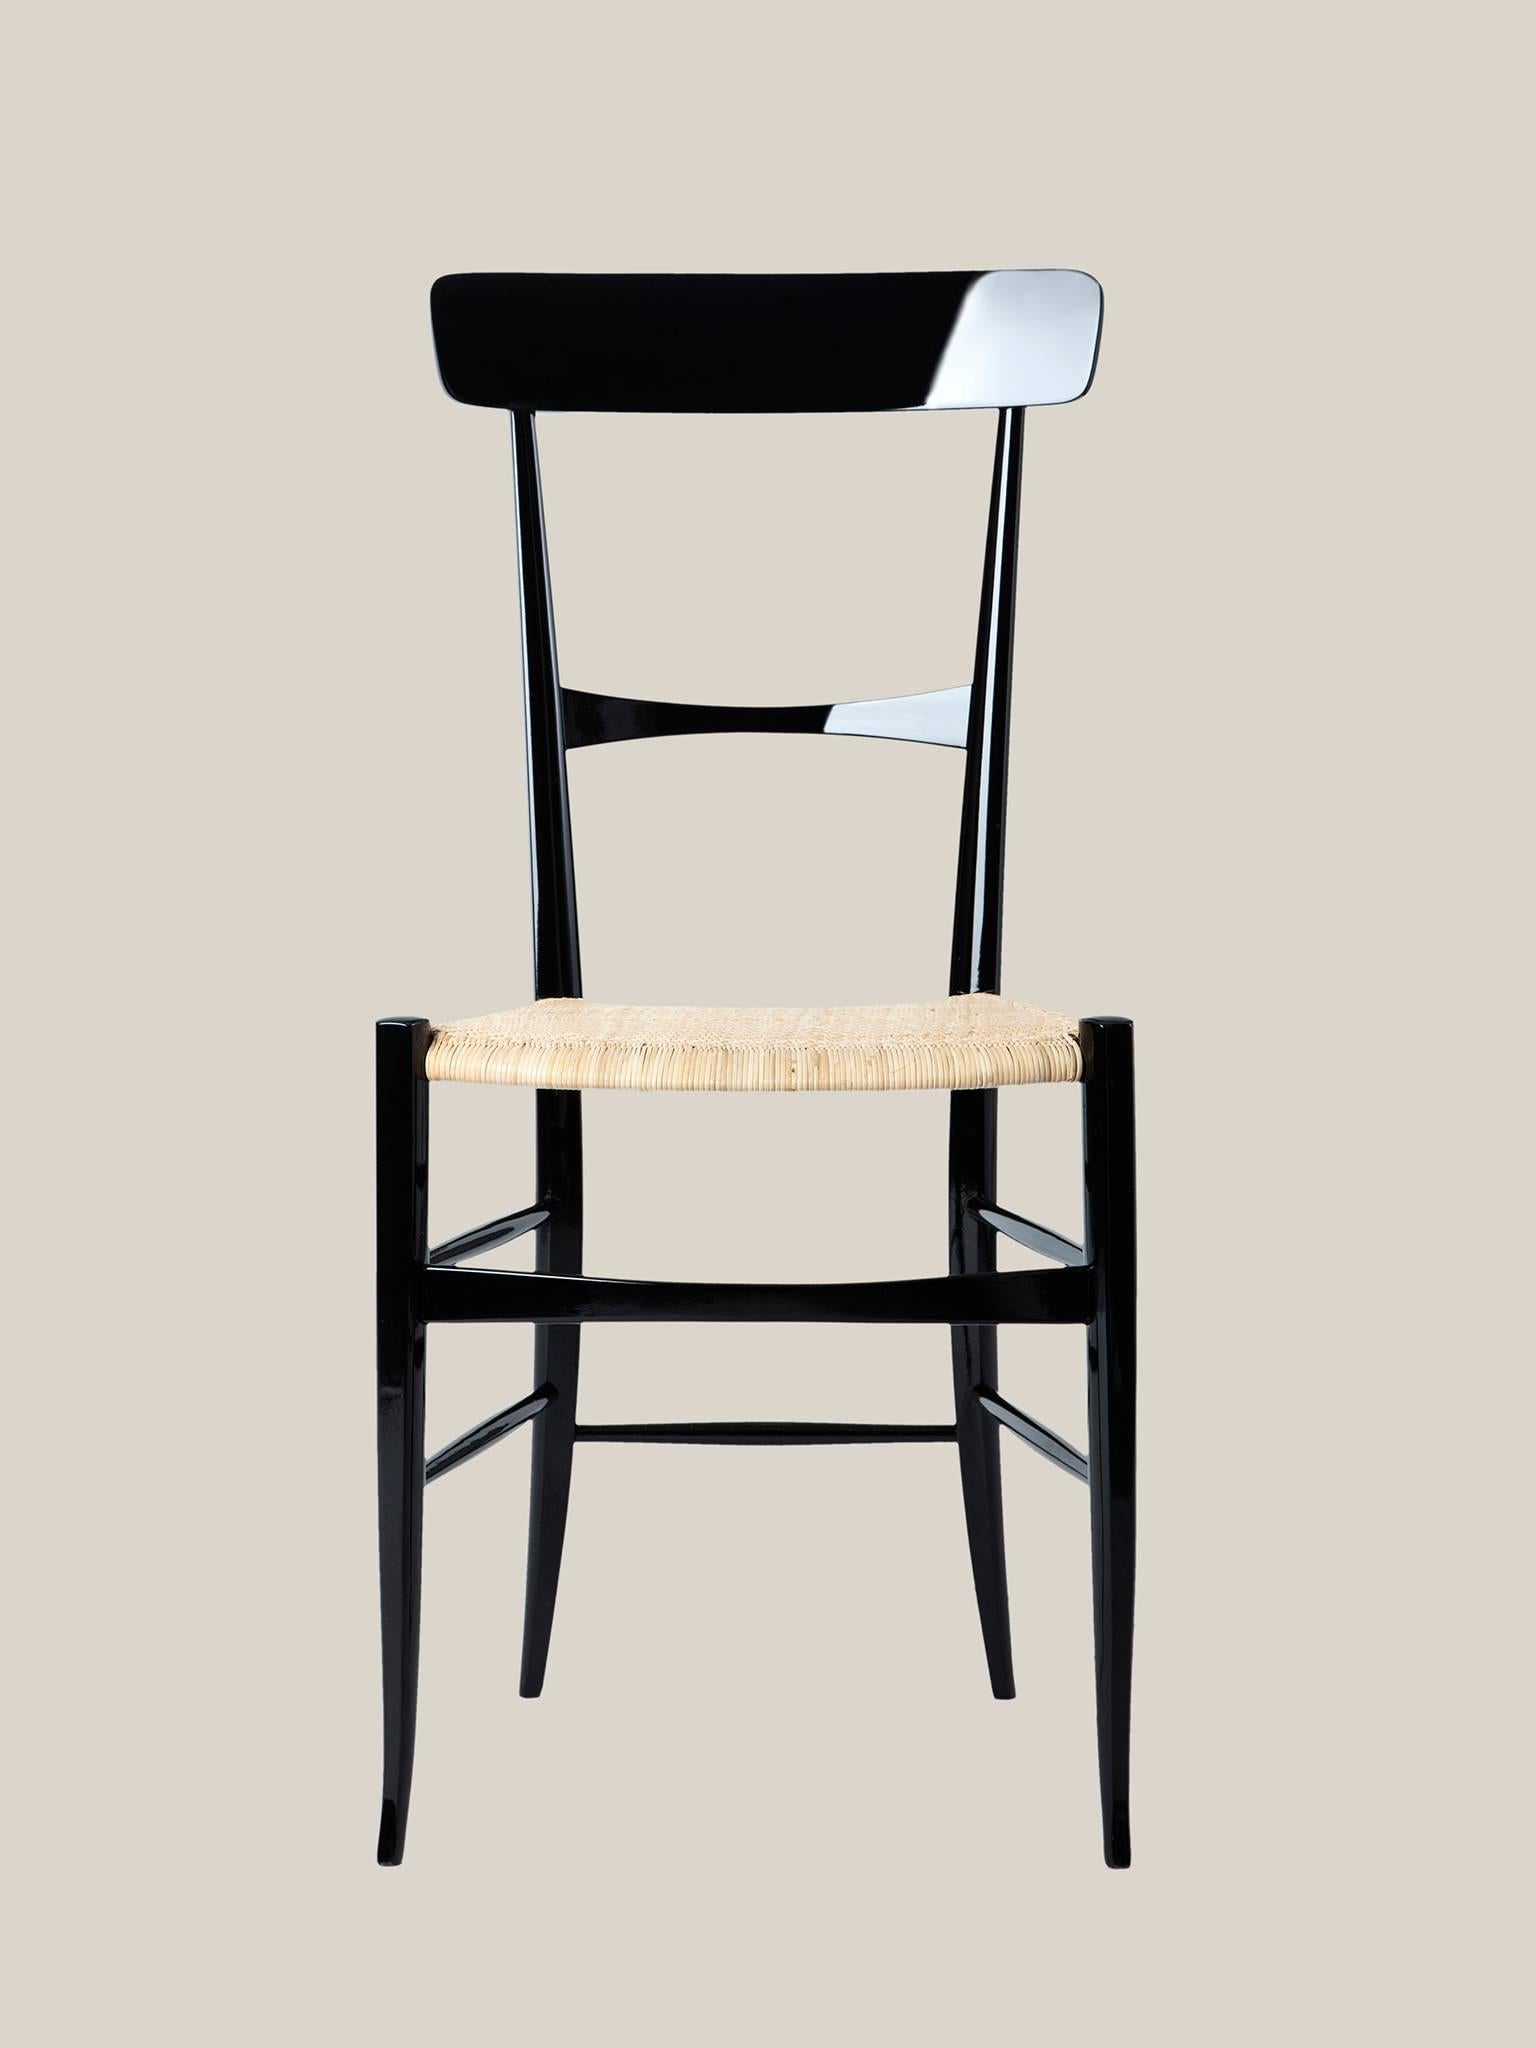 The Leggerissima chair is an extremely rational and linear model of the 20th century, made through a simplification of forms and reduction of materials.
Its essential geometry respects the construction techniques used in the Chiavari model.
Ideal